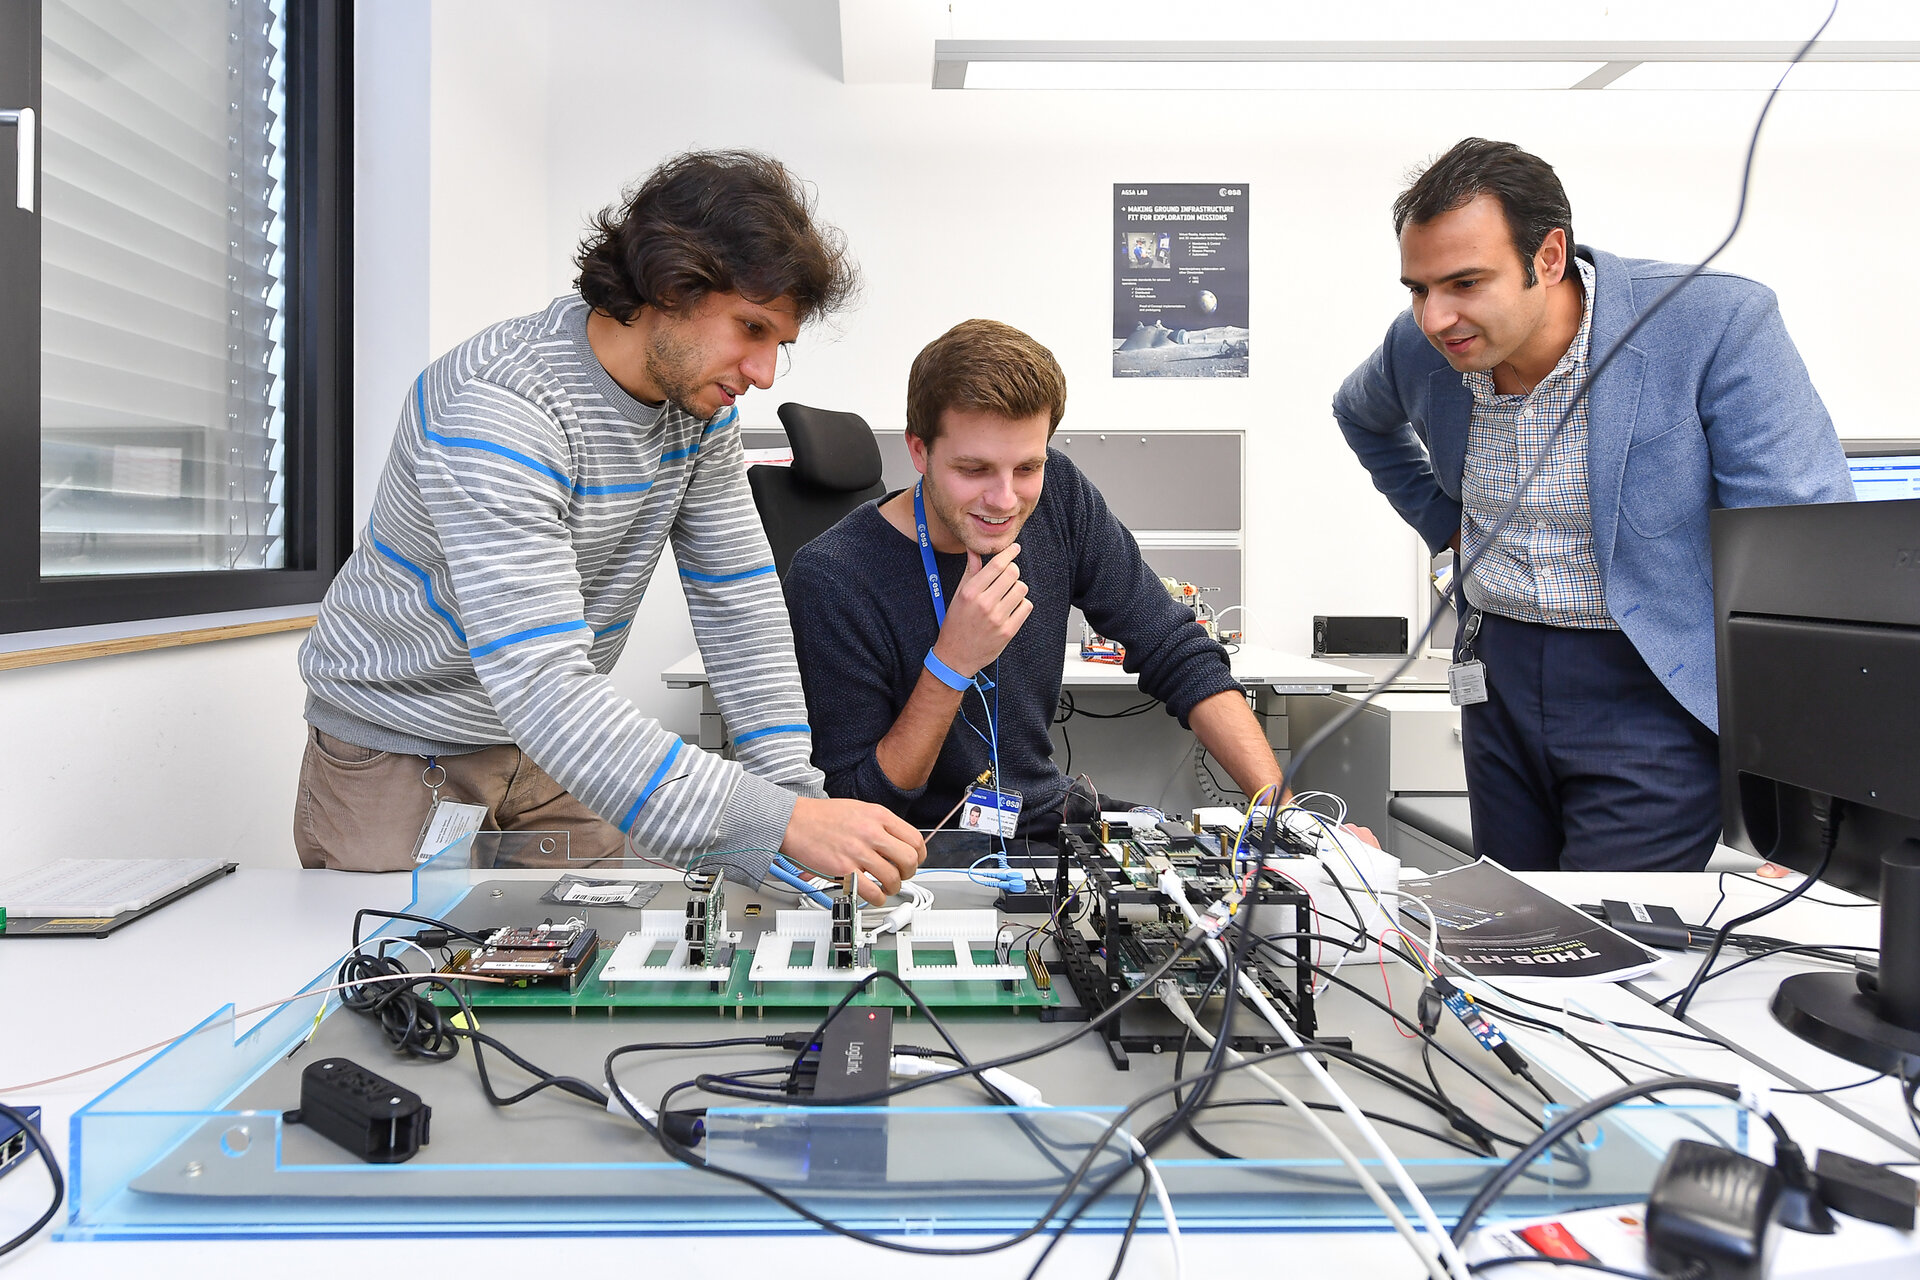 Mehran Sarkarati (right) and his colleagues working at ESOC's AGSA Lab